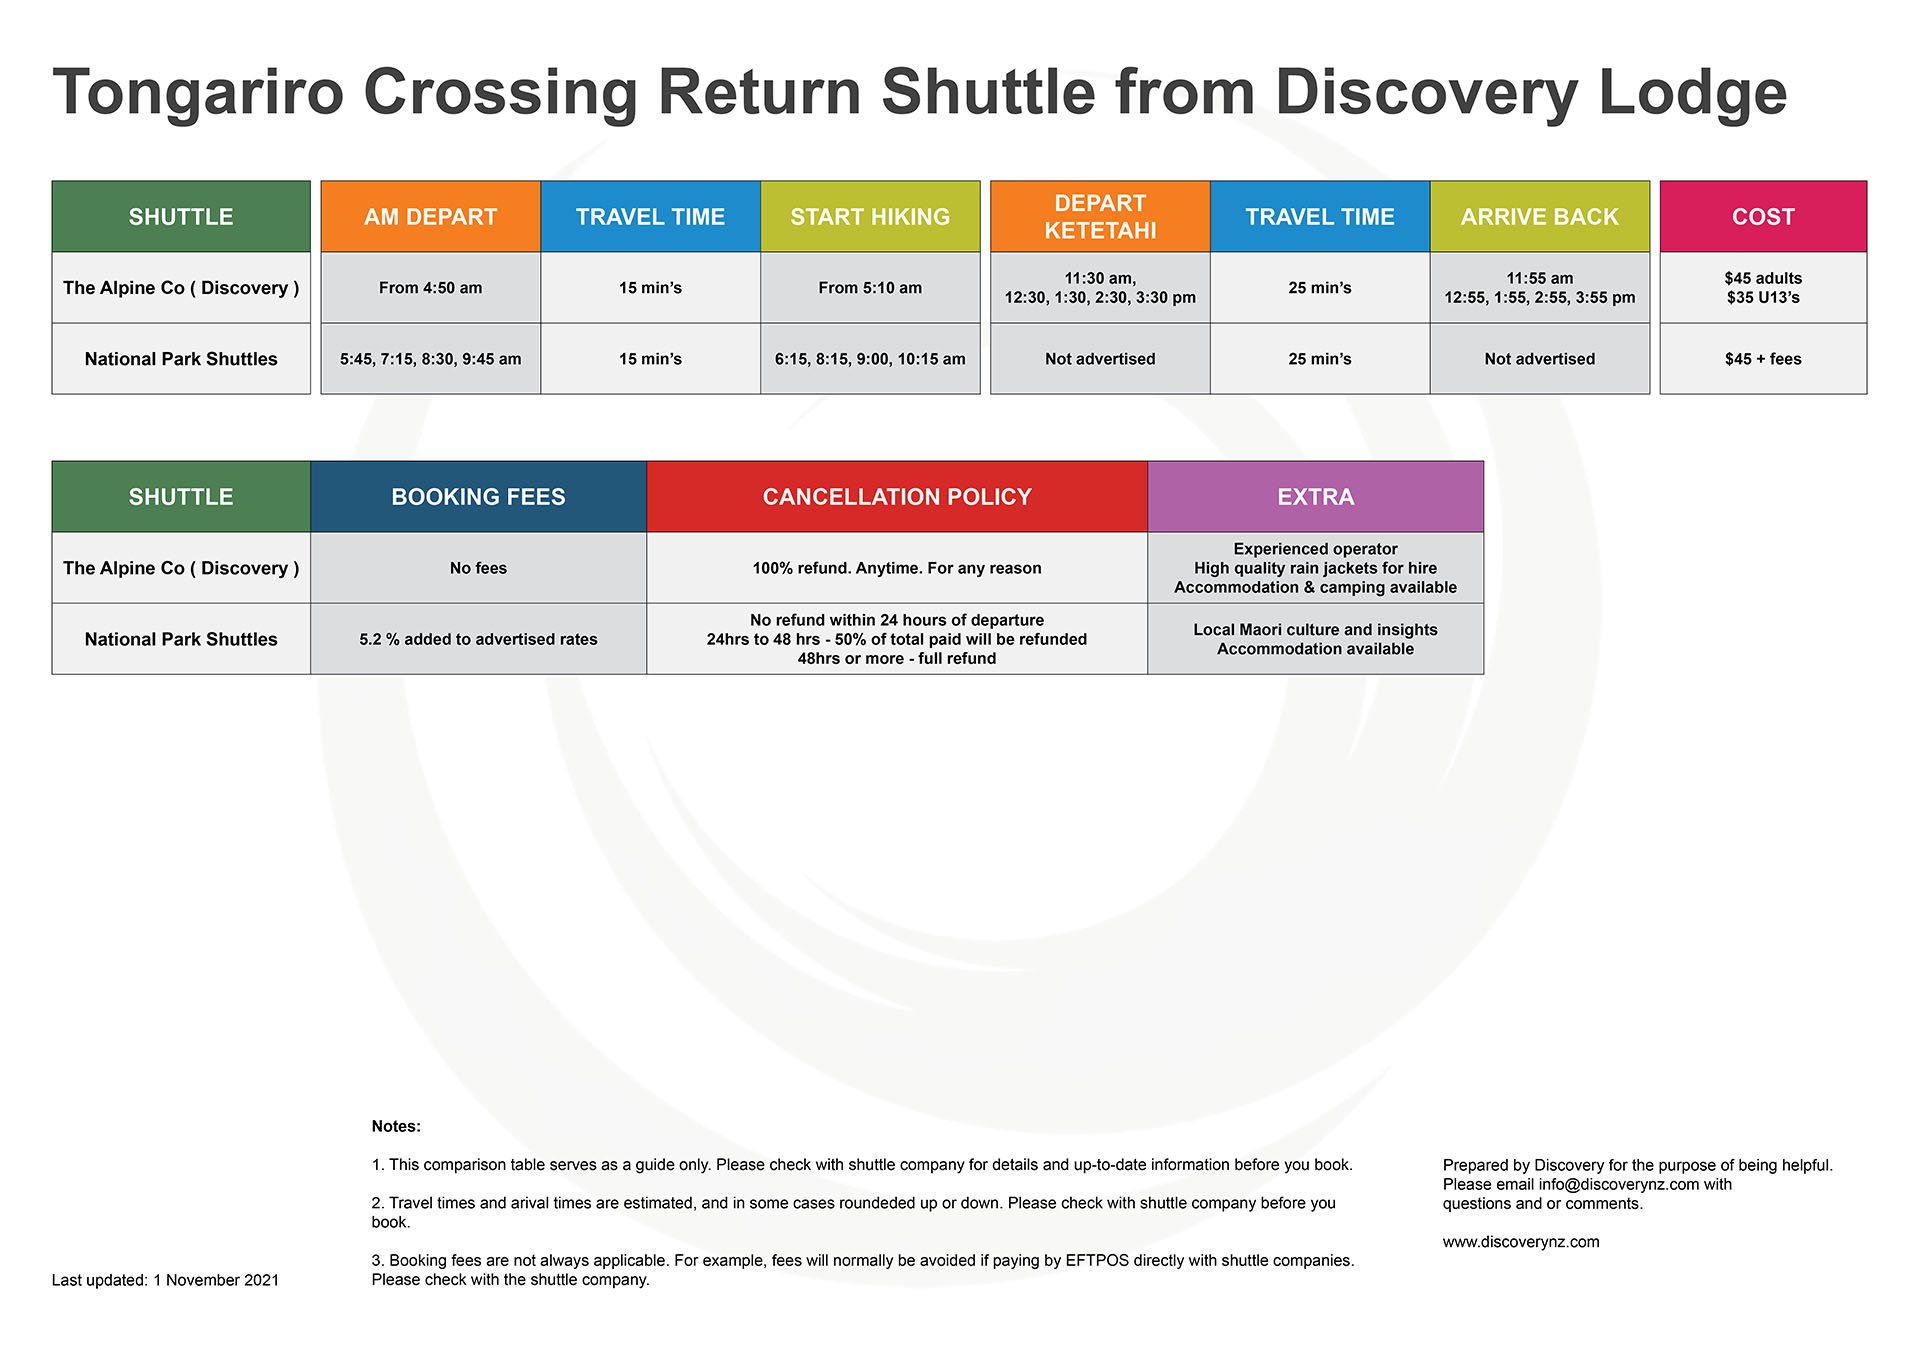 Tongariro Crossing Comparison table. Return shuttles from Discovery Lodge